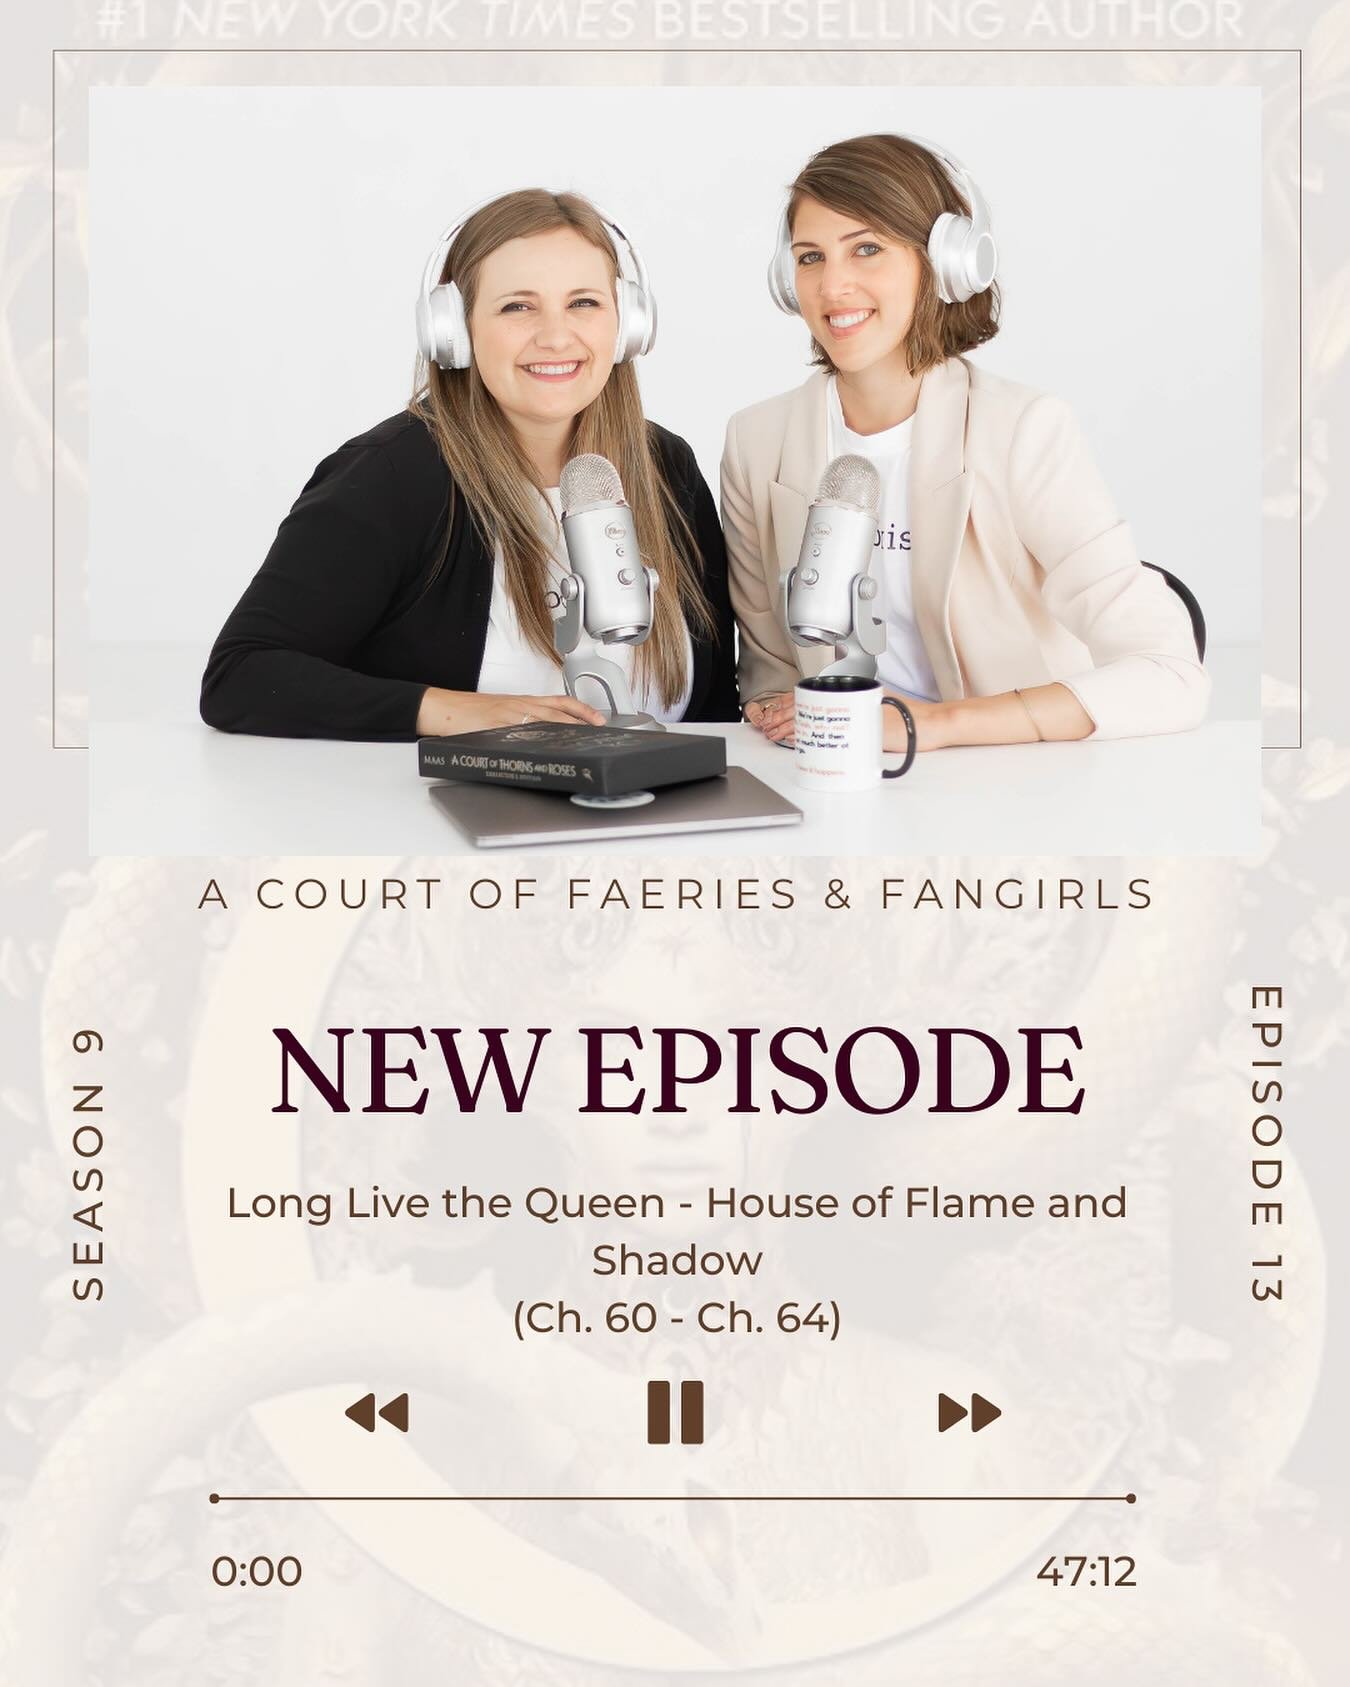 Season 9 Episode 13 is now streaming on all your favorite listening platforms. NO SPOILERS!!

Join us as we dig in to CC3:HOFAS Chapters 60-64. We deep dive into all the characters, plot, &amp; world while sharing our thoughts and opinions.

AHHhHhHh